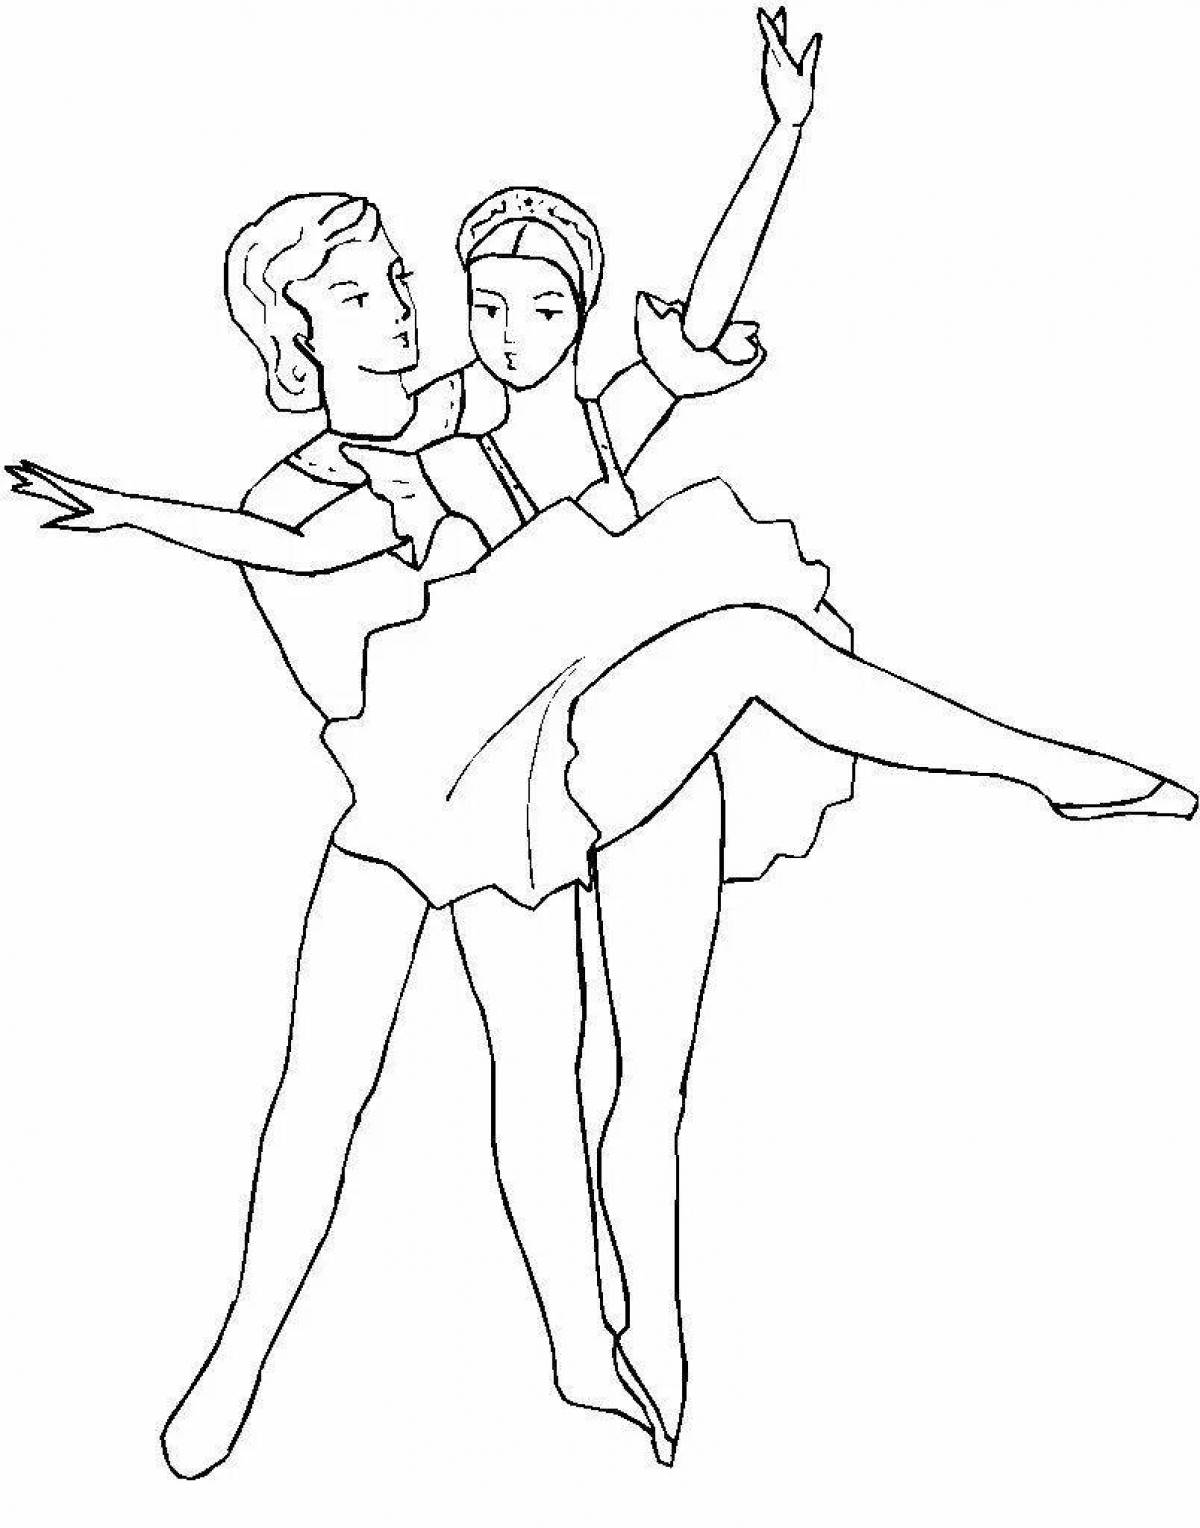 Coloring page funny dancer